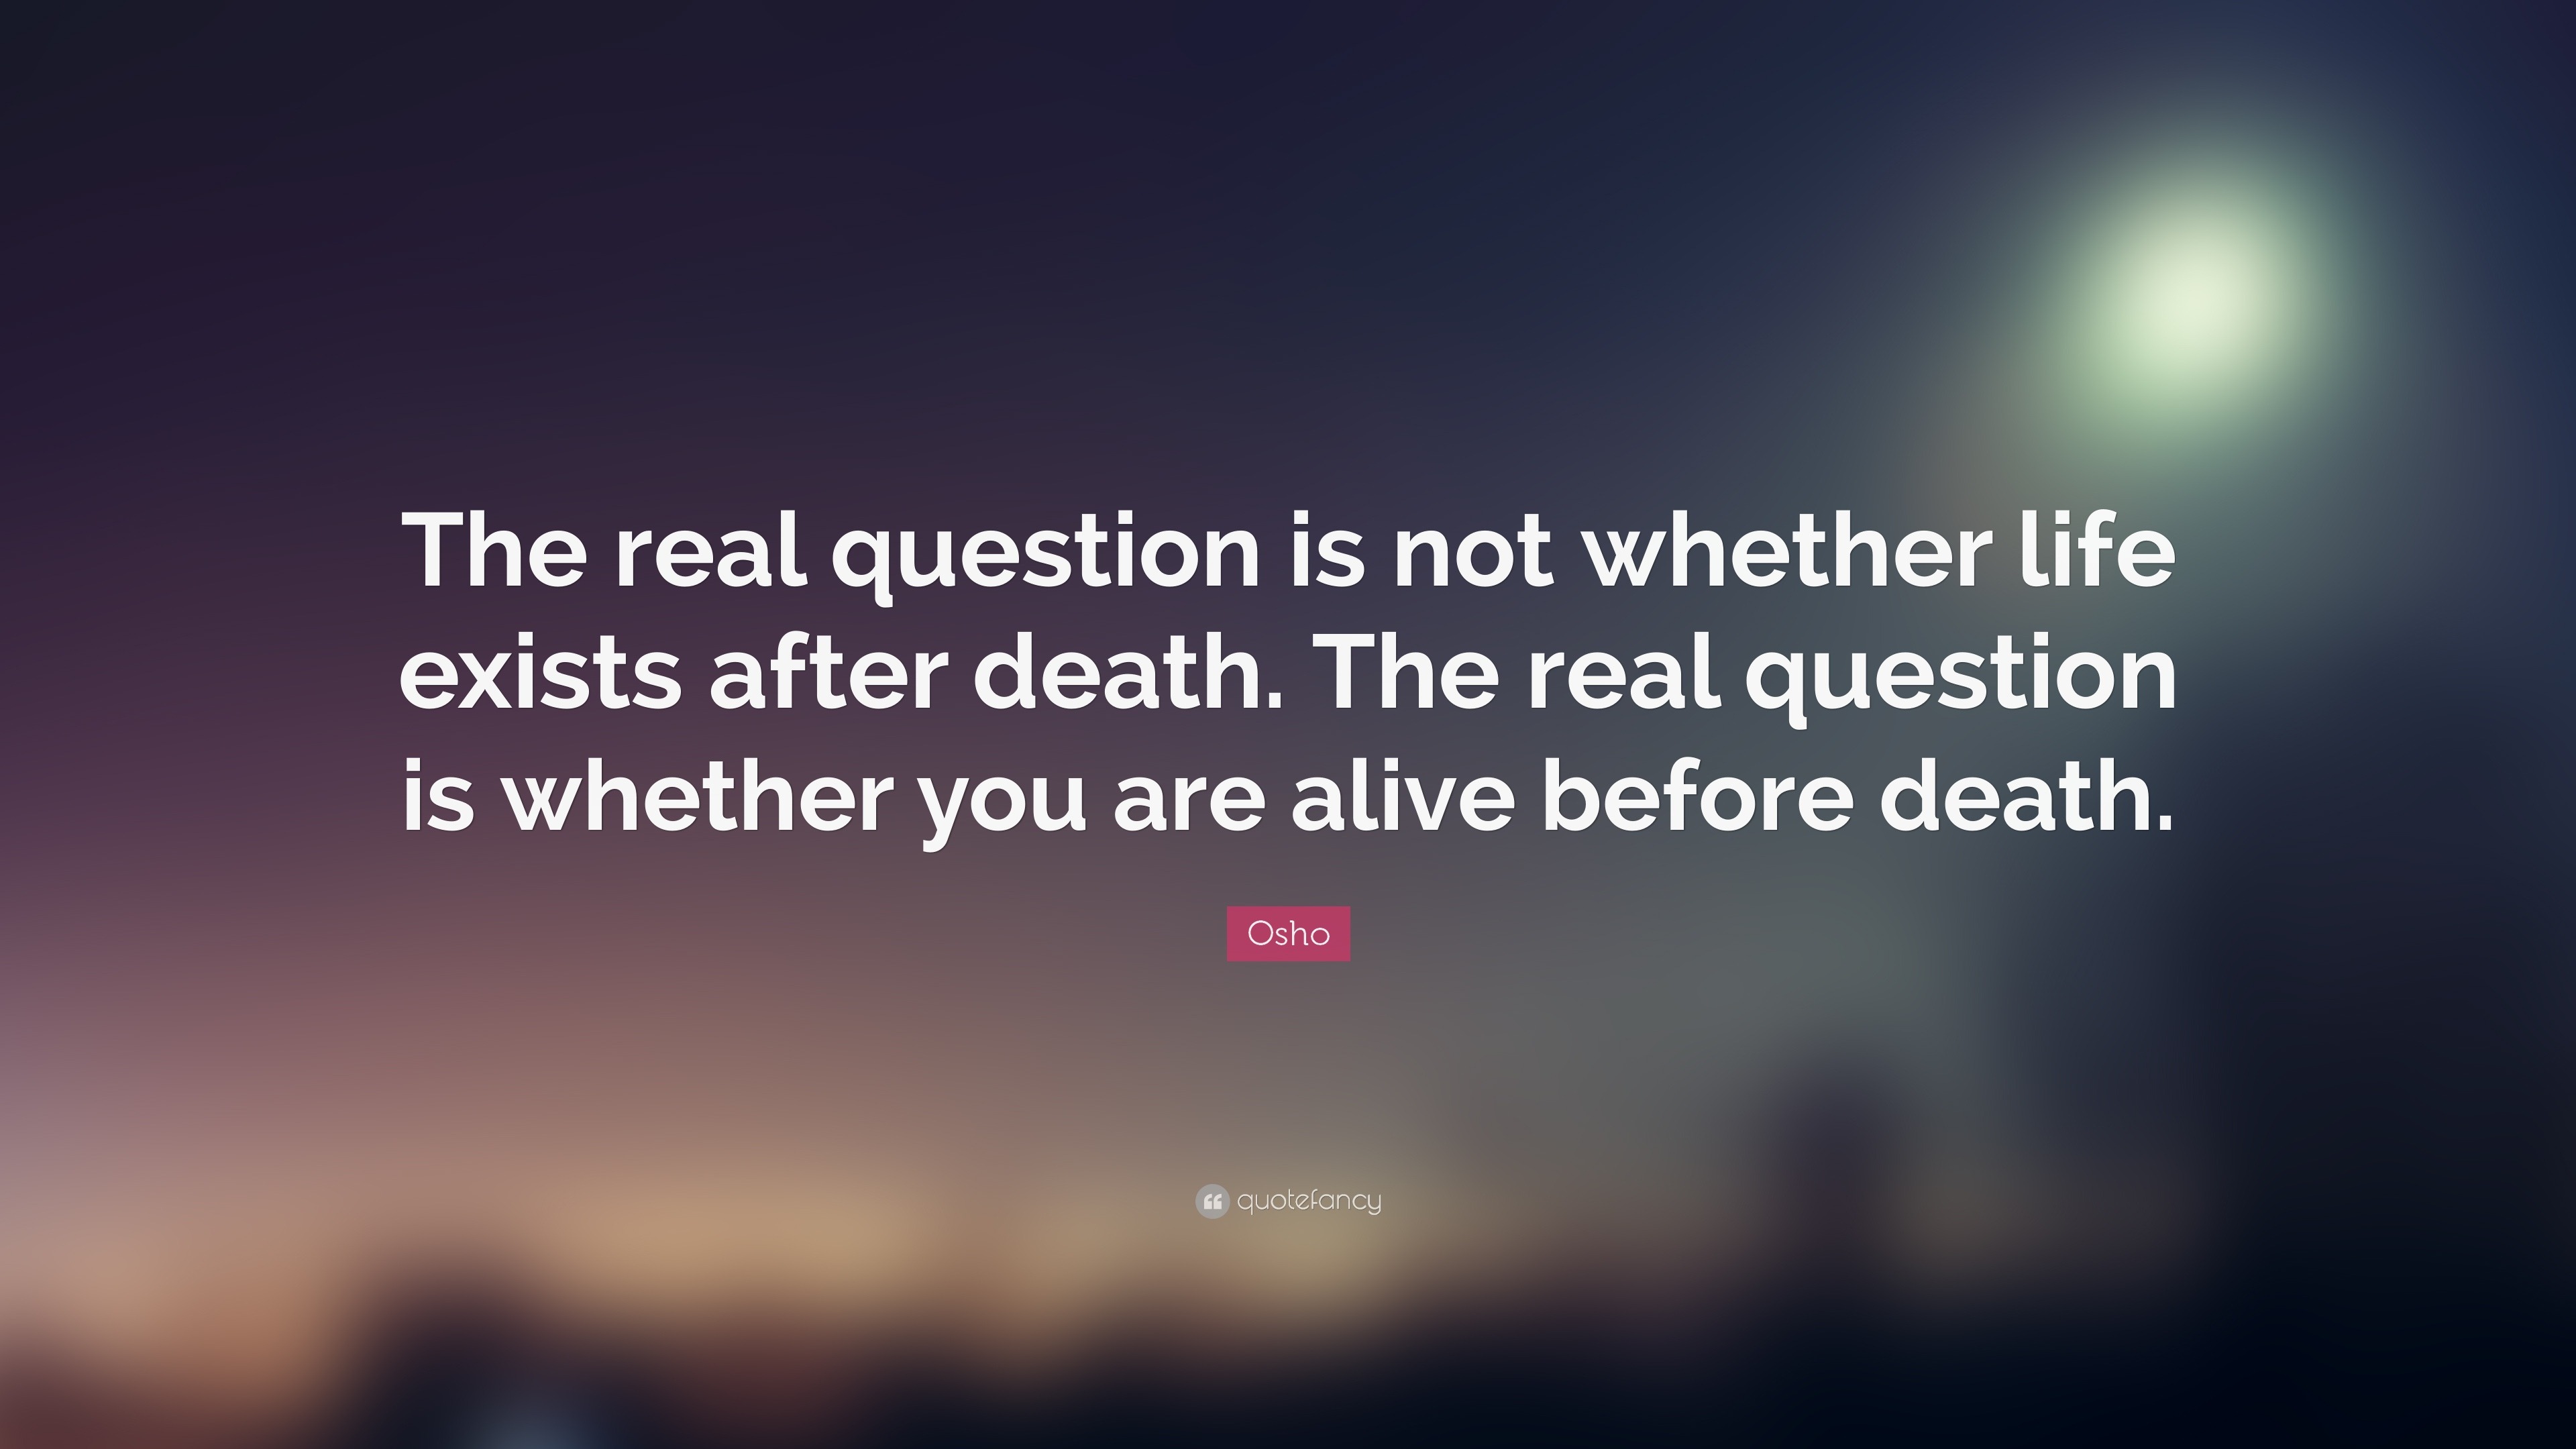 Osho Quote “The real question is not whether life exists after The